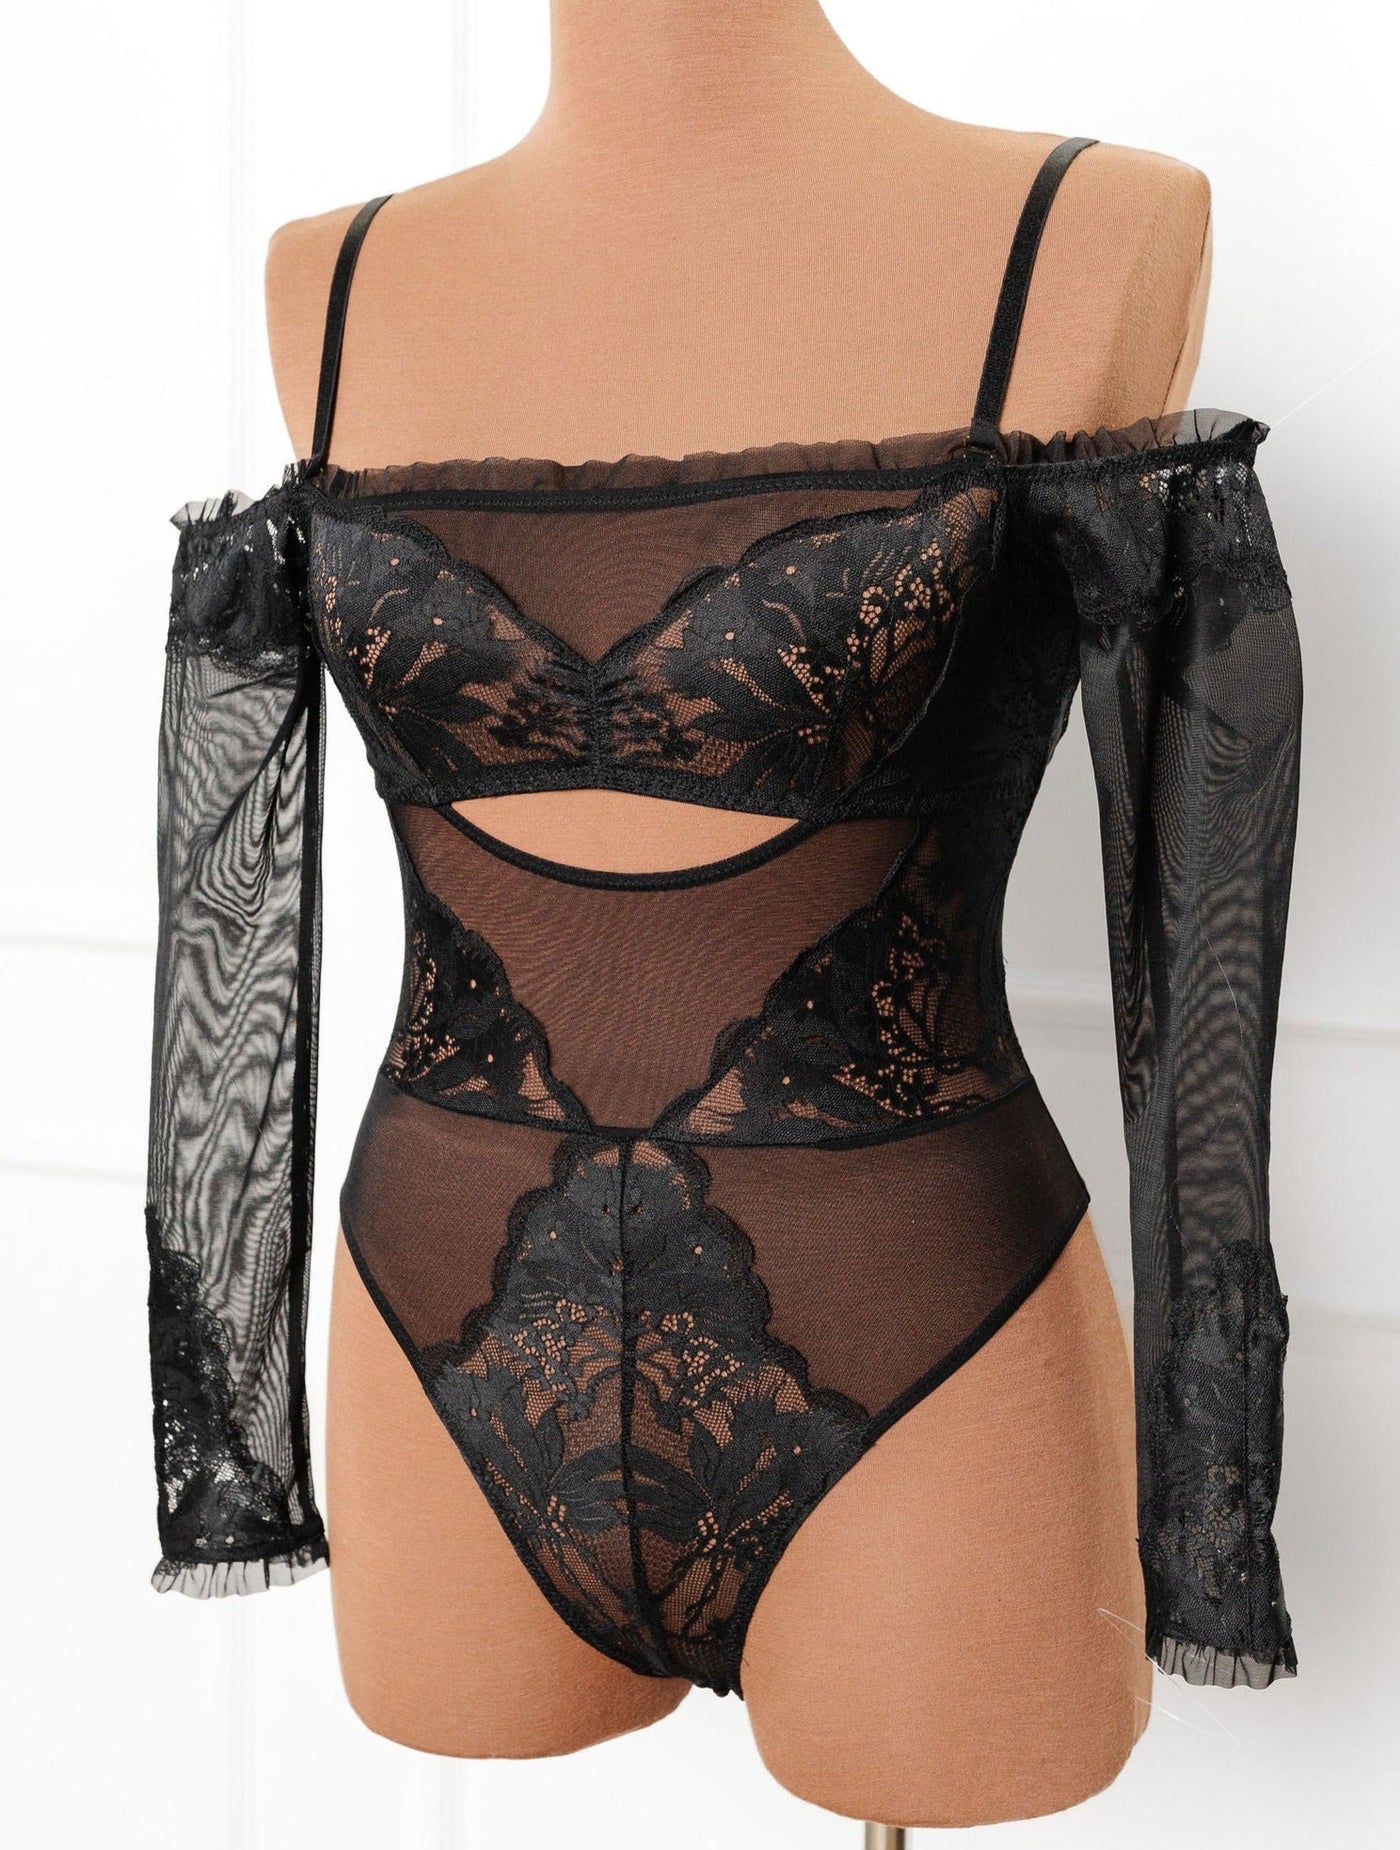 Lace & Mesh Off-The-Shoulder Crotchless Teddy - Black